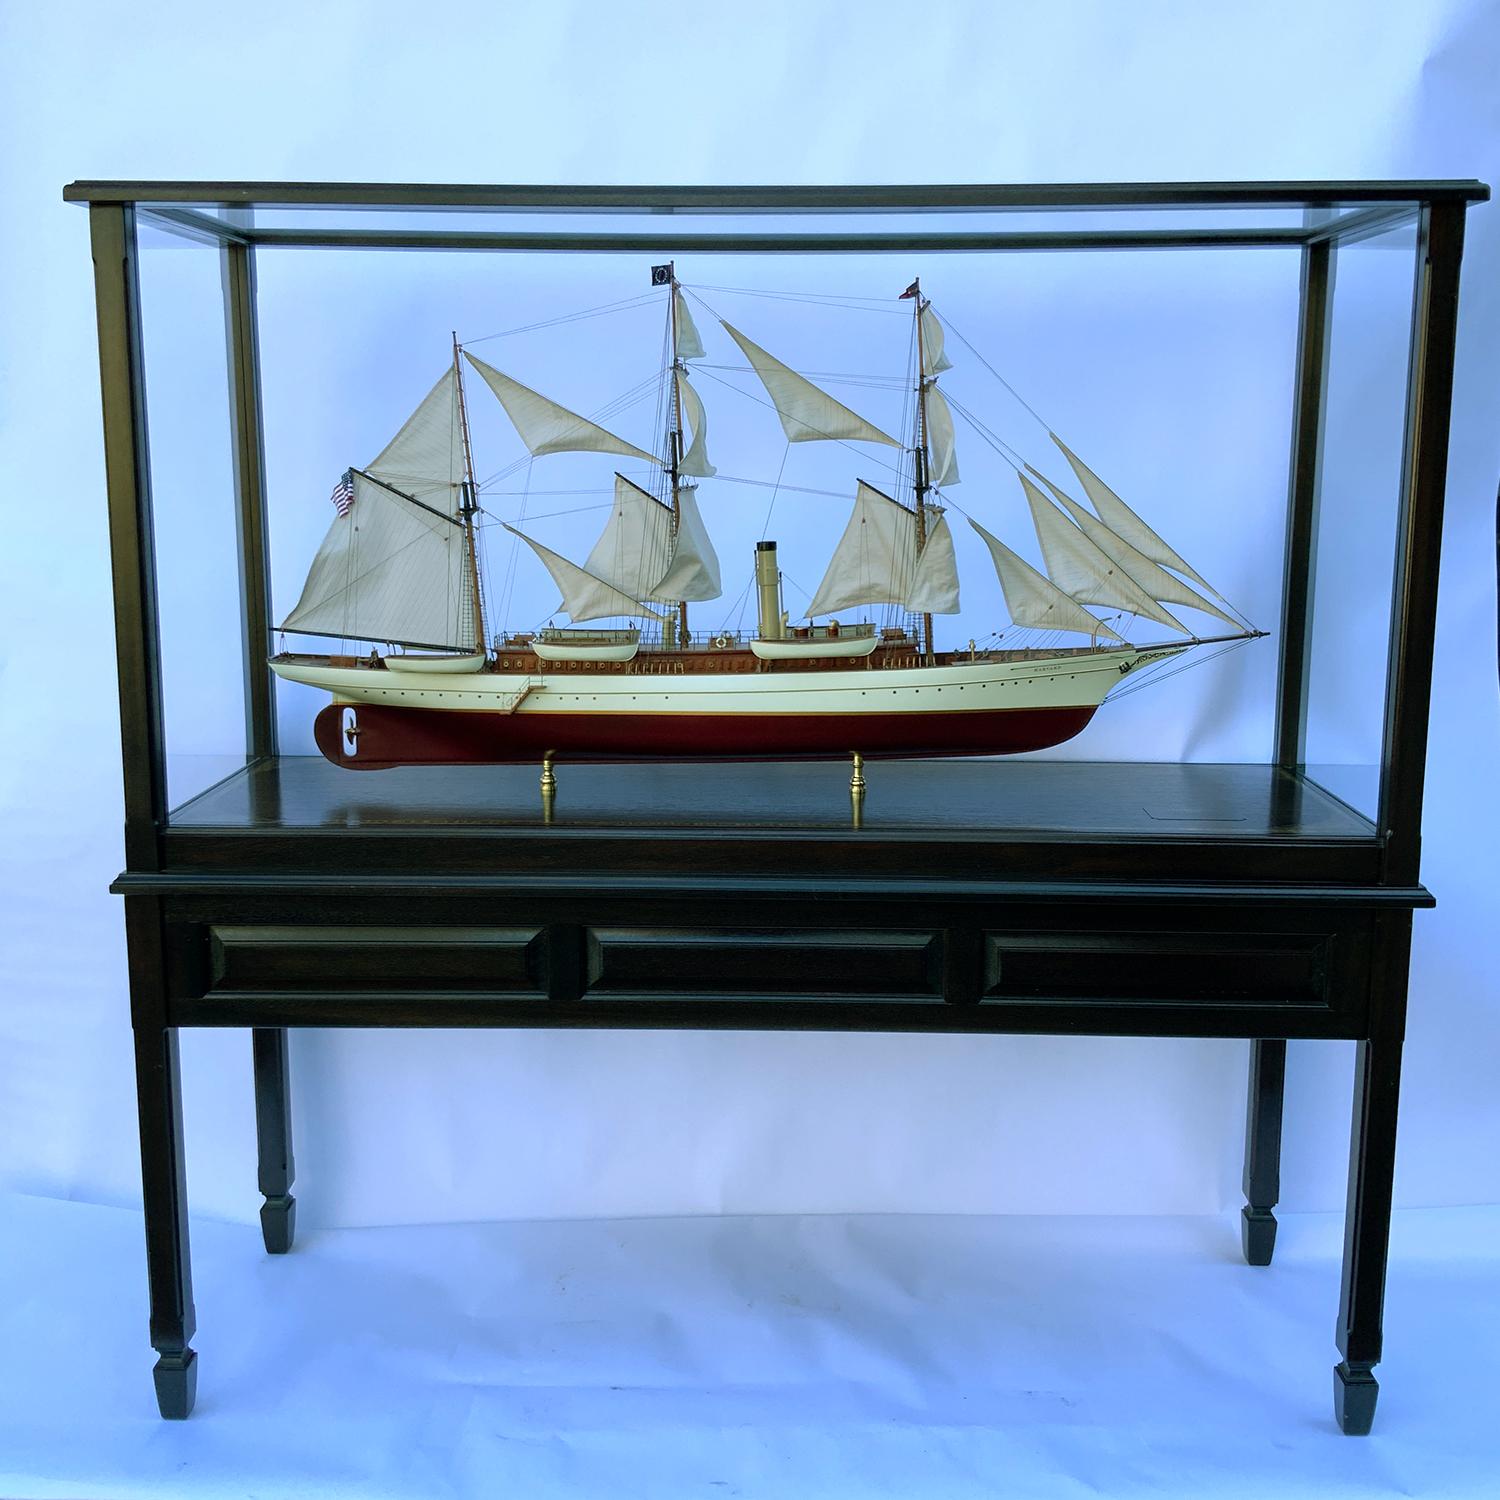 Expertly crafted model of George Baker's private steam yacht 